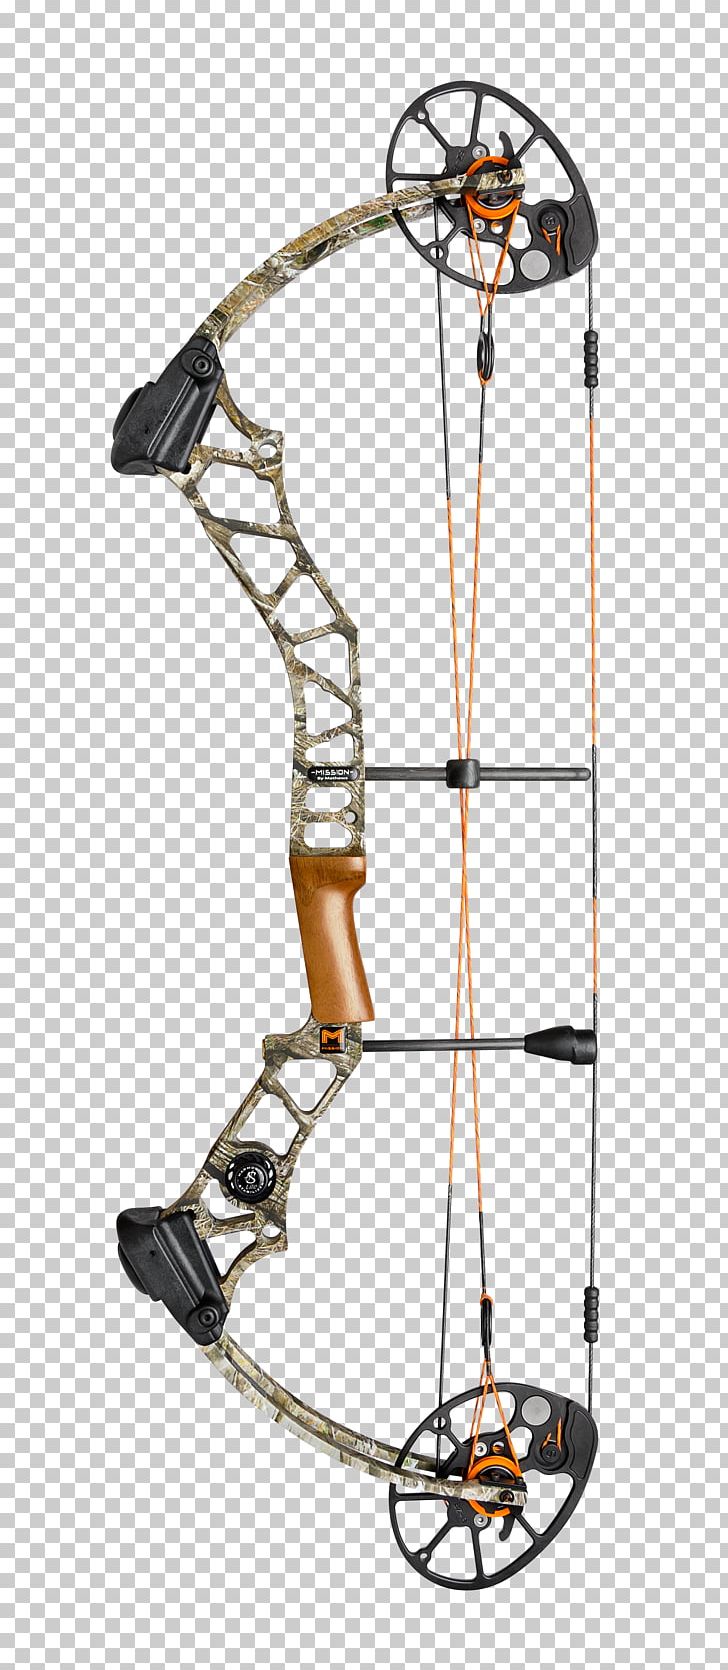 Bow And Arrow Hunting Compound Bows Ballistics Crossbow PNG, Clipart, Archery, Arrow, Ballistics, Bit, Bow Free PNG Download